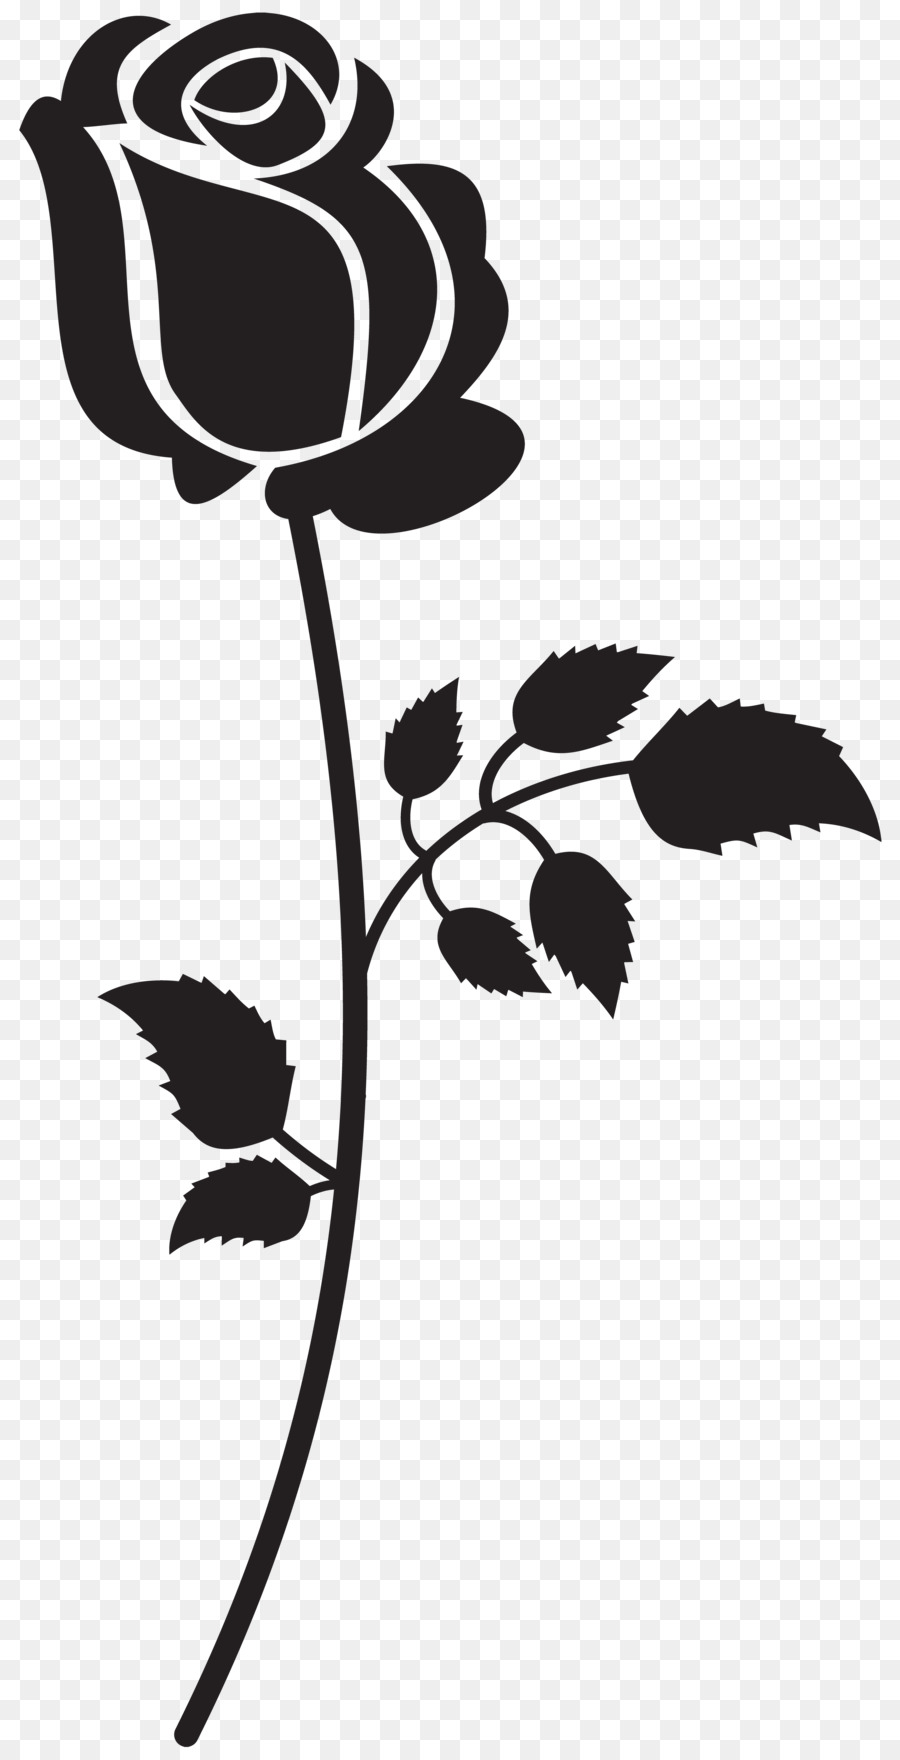 Silhouette Rose Clip art - Rose Silhouette Cliparts png download - 3591*7000 - Free Transparent Silhouette png Download.